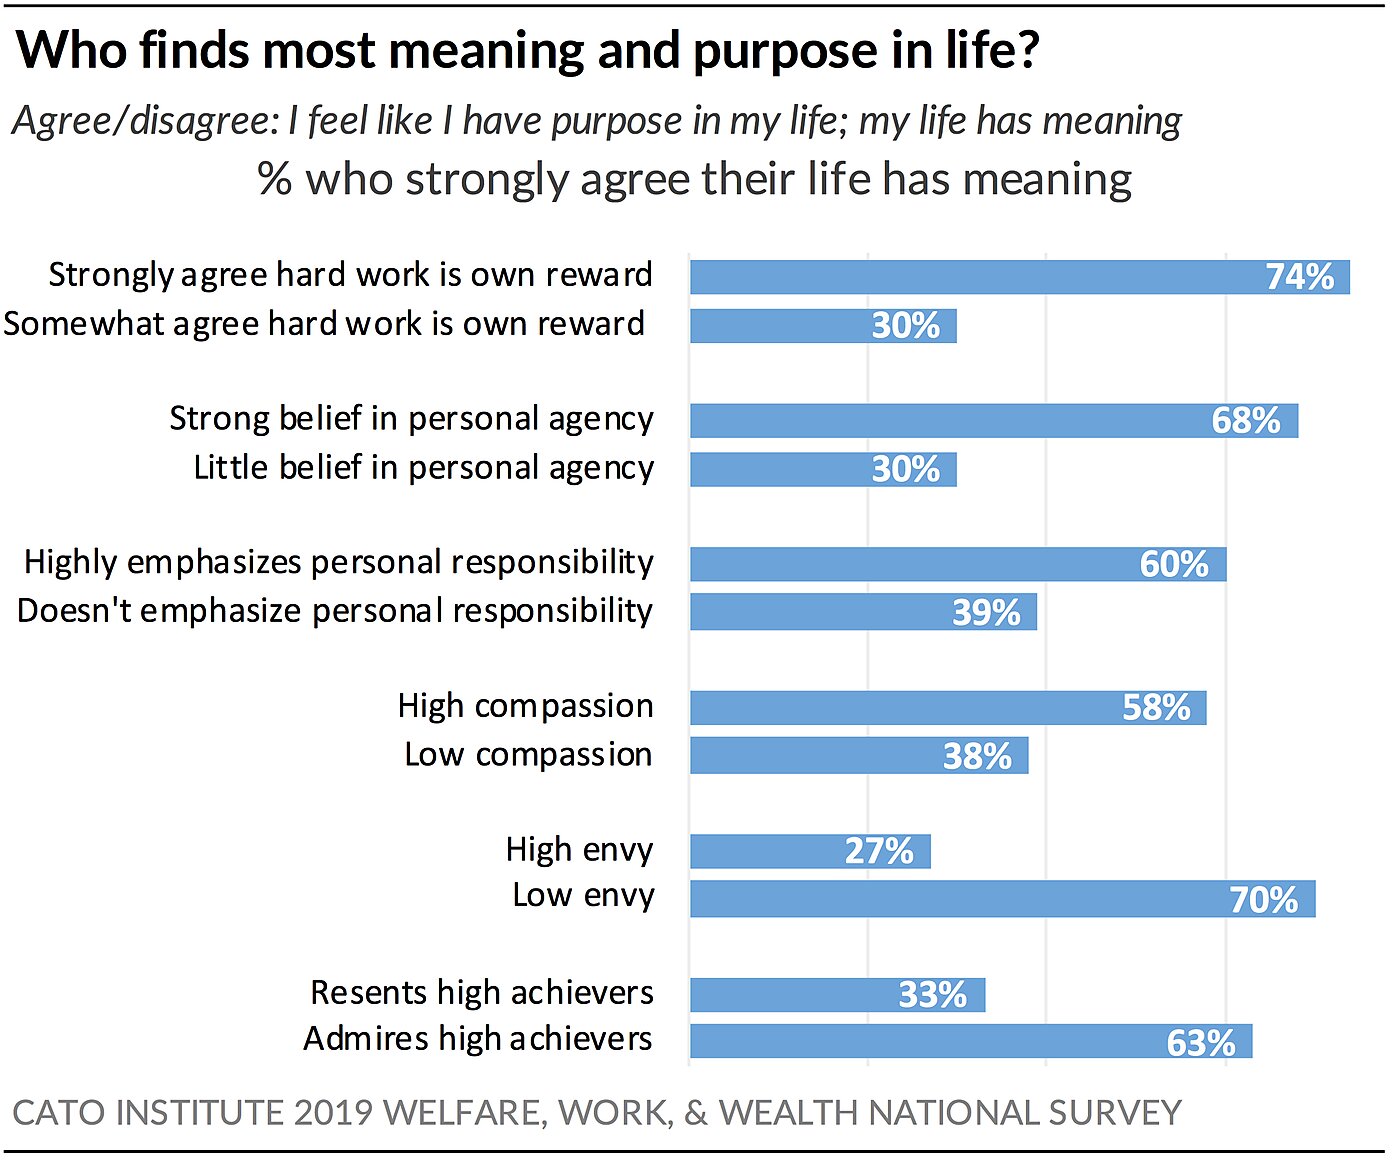 Where Americans Find Meaning in Life